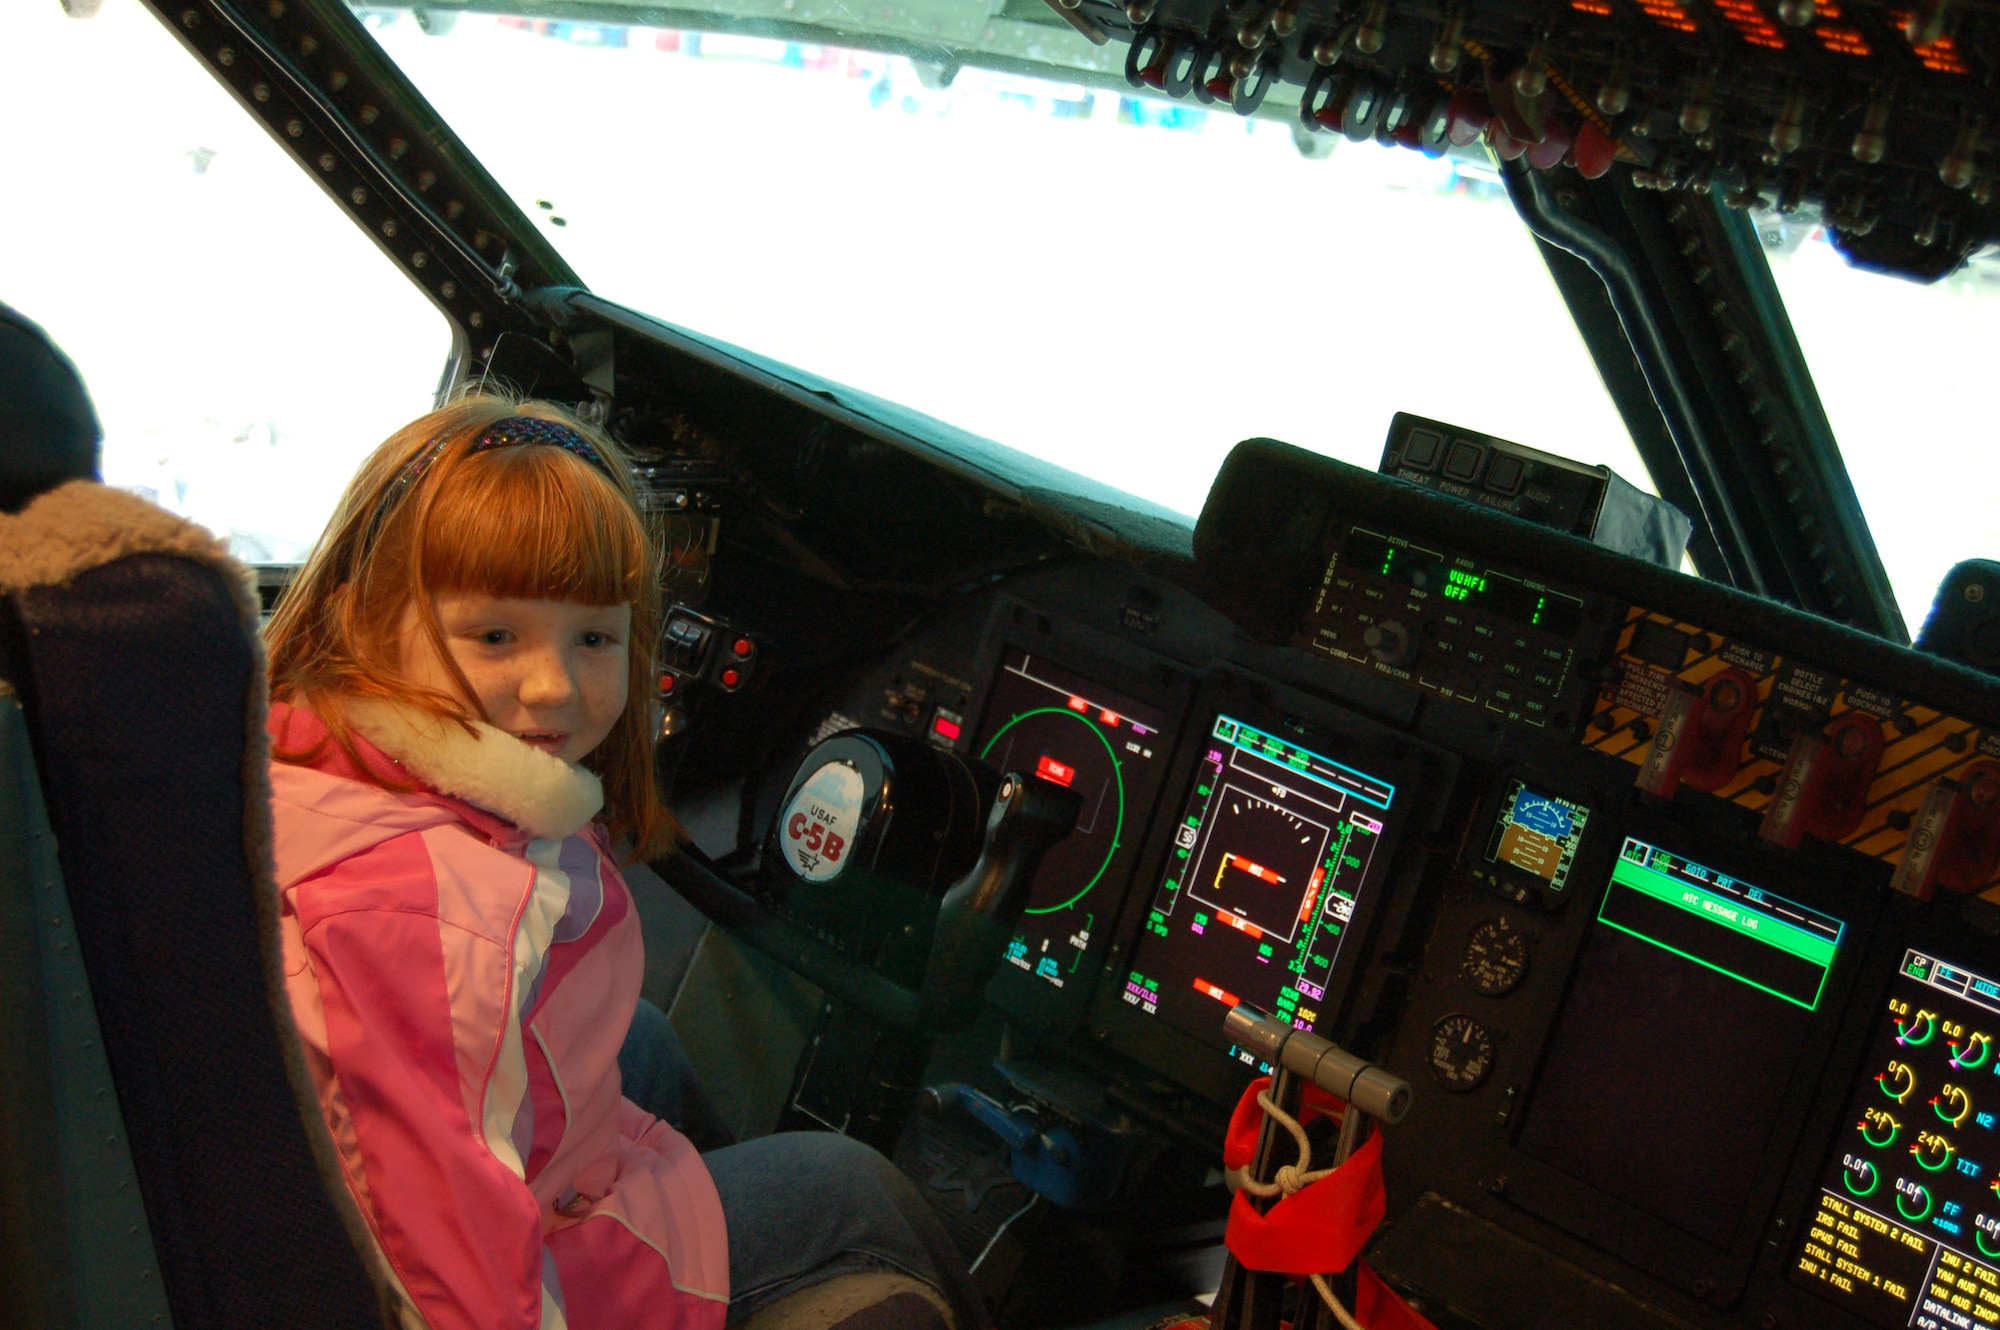 Elizabeth Kukulich, daughter of Richard Kukulich of Bear, Del., sits in the cockpit of a C-5 Galaxy while touring the C-5 static display here Saturday. The static display gave Open House attendees an inside look at the C-5’s enormous cargoholds, crew compartments and flightdeck areas. (U.S. Air Force photo/Staff Sgt. James Wilkinson)